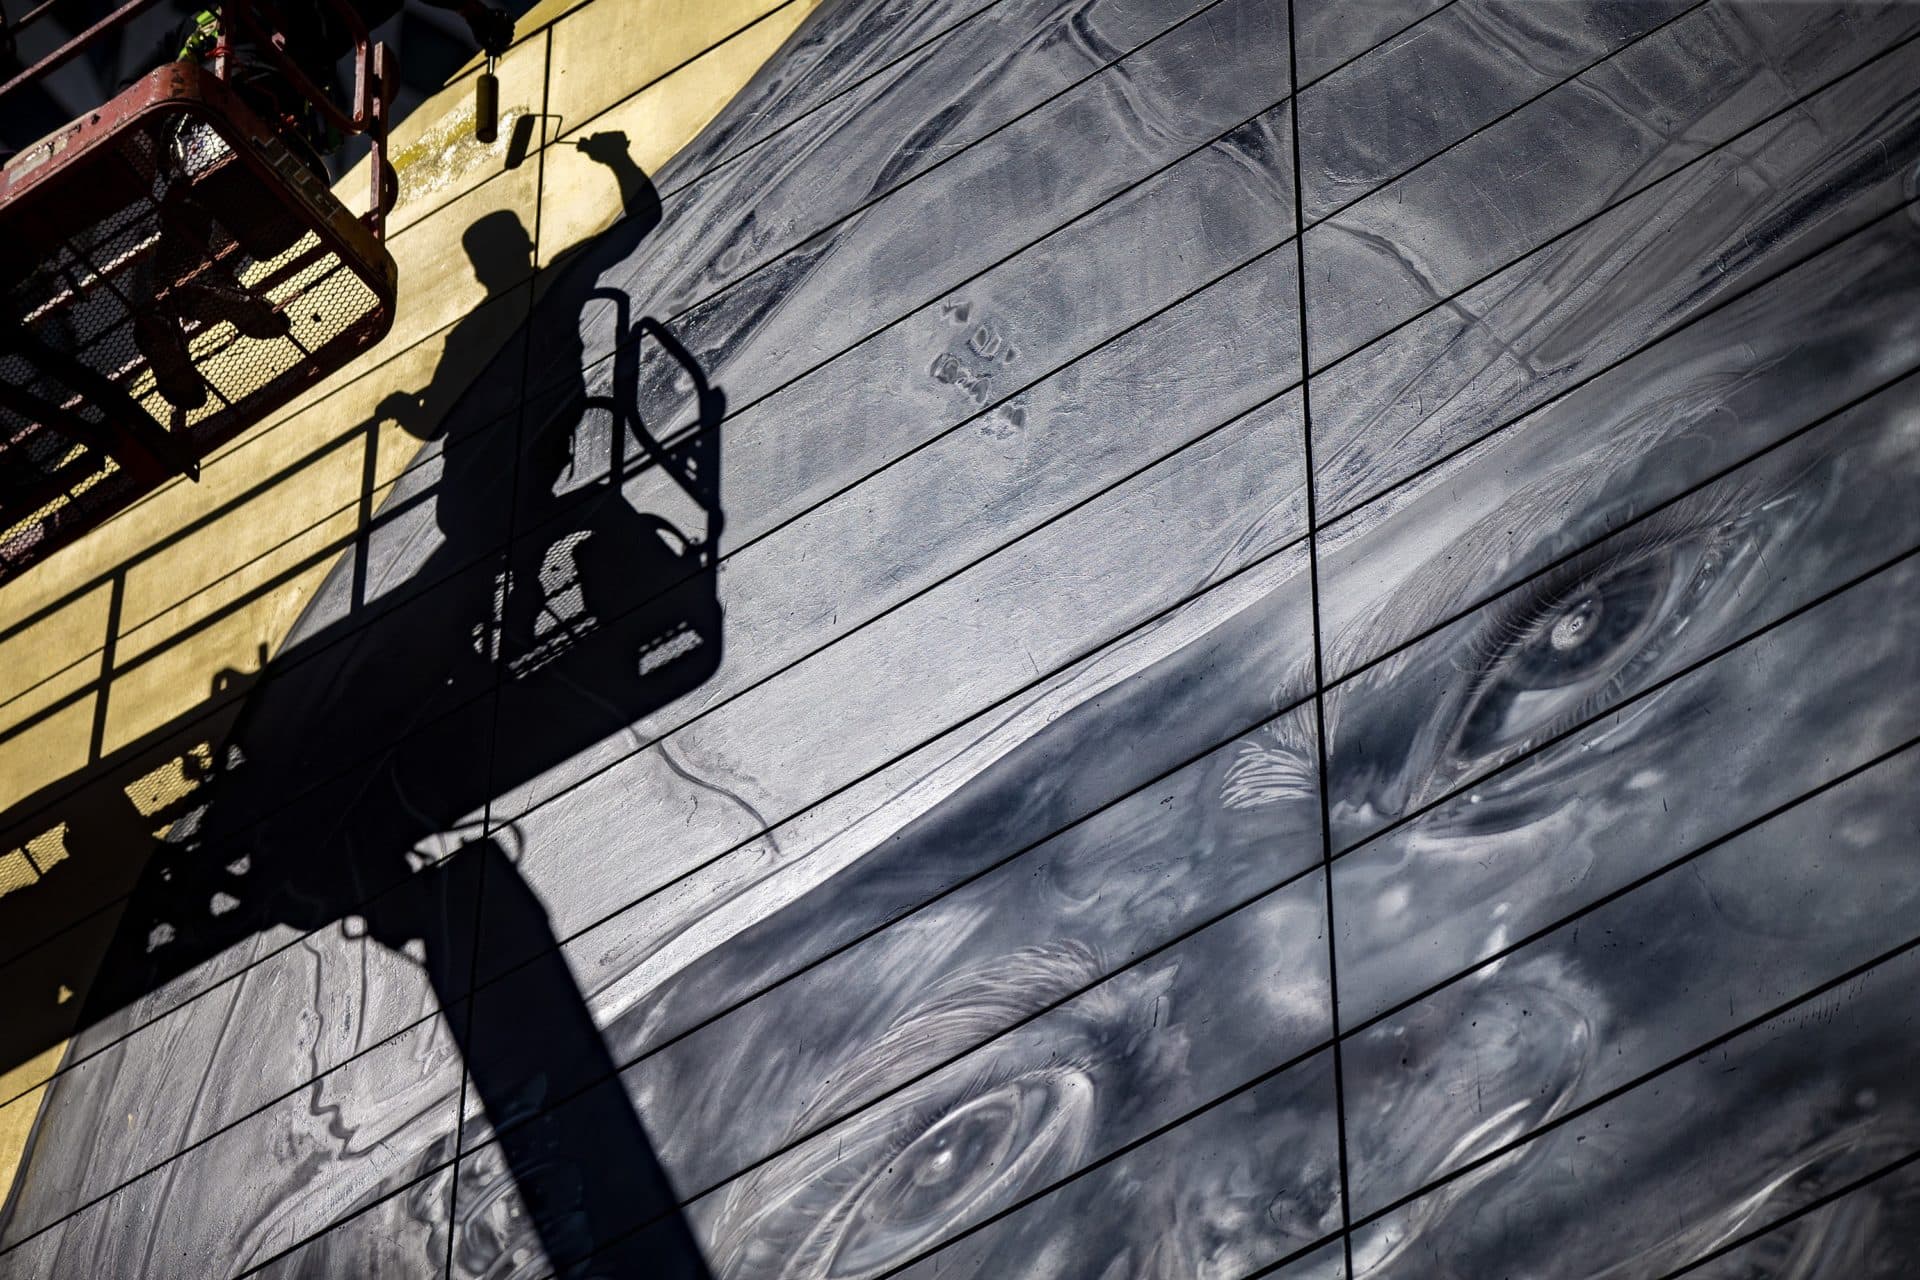 On a knuckle lift high in the air, Rob “ProblaK” Gibbs works on “Breathe Life Together,” the next mural to be featured on the façade of the Dewey Square Tunnel Air Intake Structure on the Rose Kennedy Greenway. (Jesse Costa/WBUR)